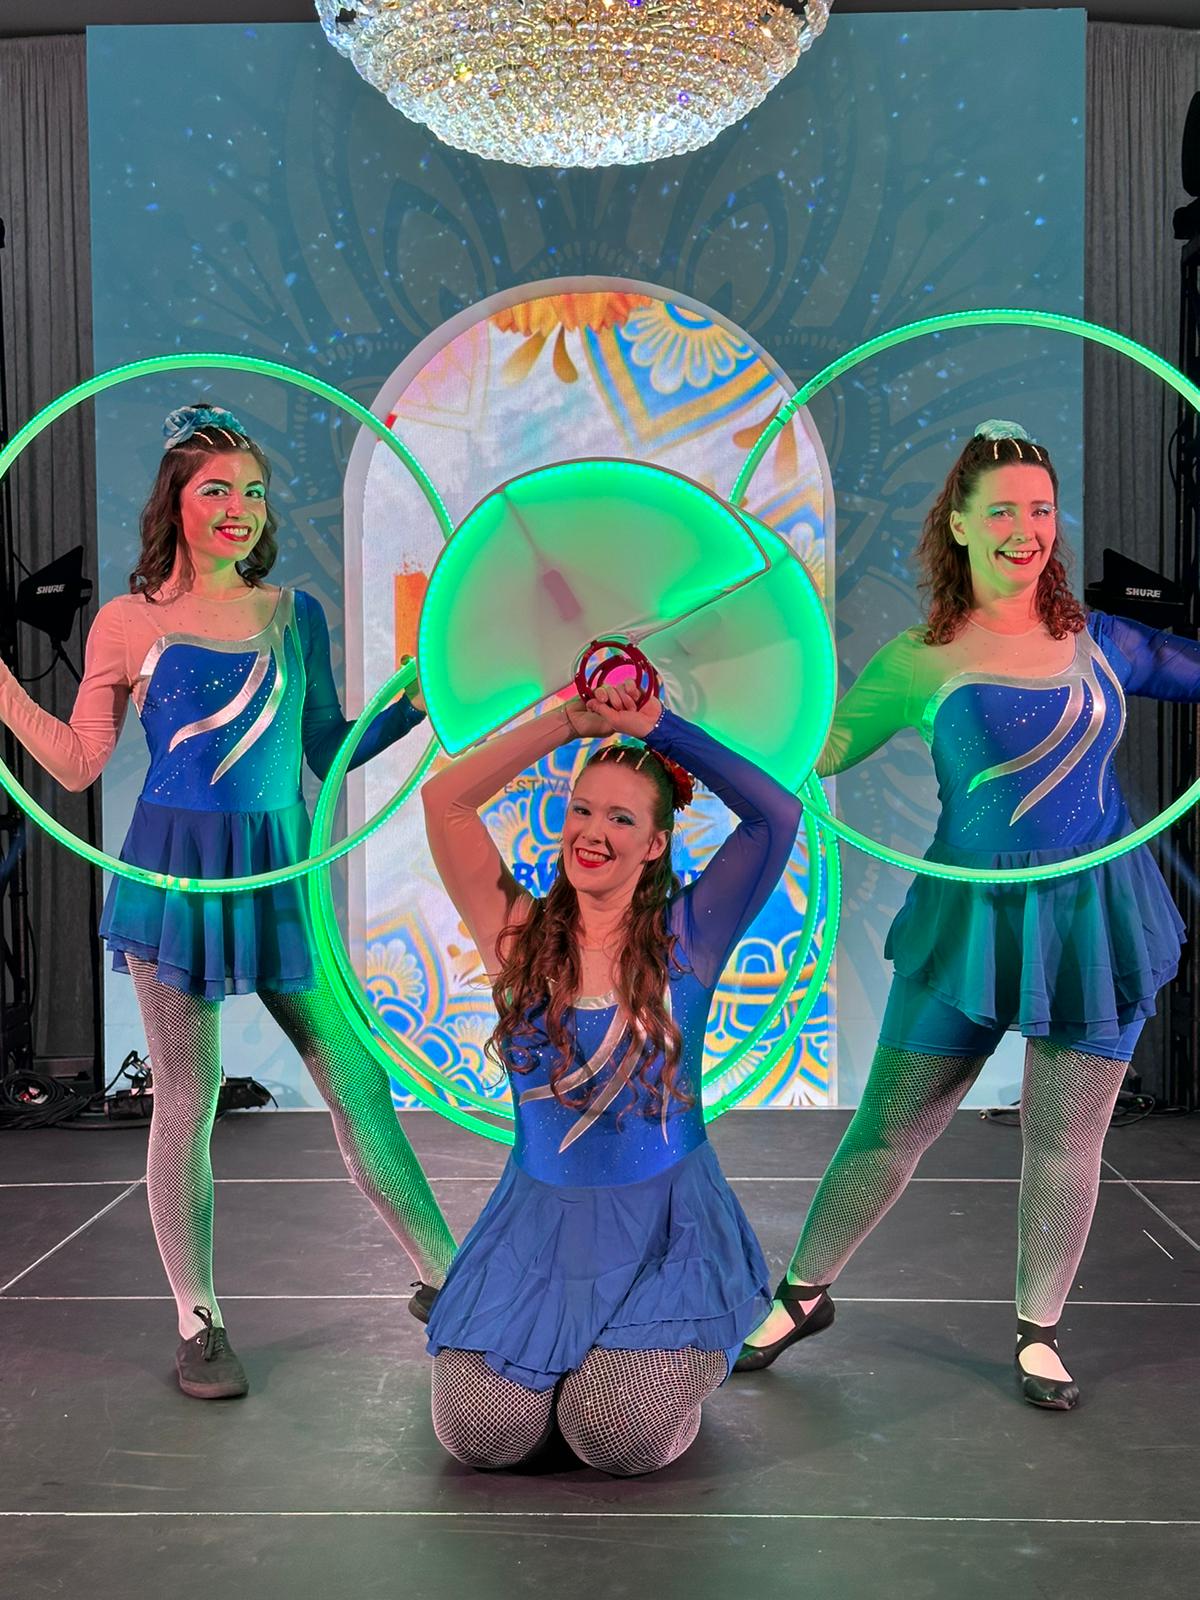 led glow show, a trio of women pose in blue and silver dresses with green glowing led hula hoops and led moon fans 